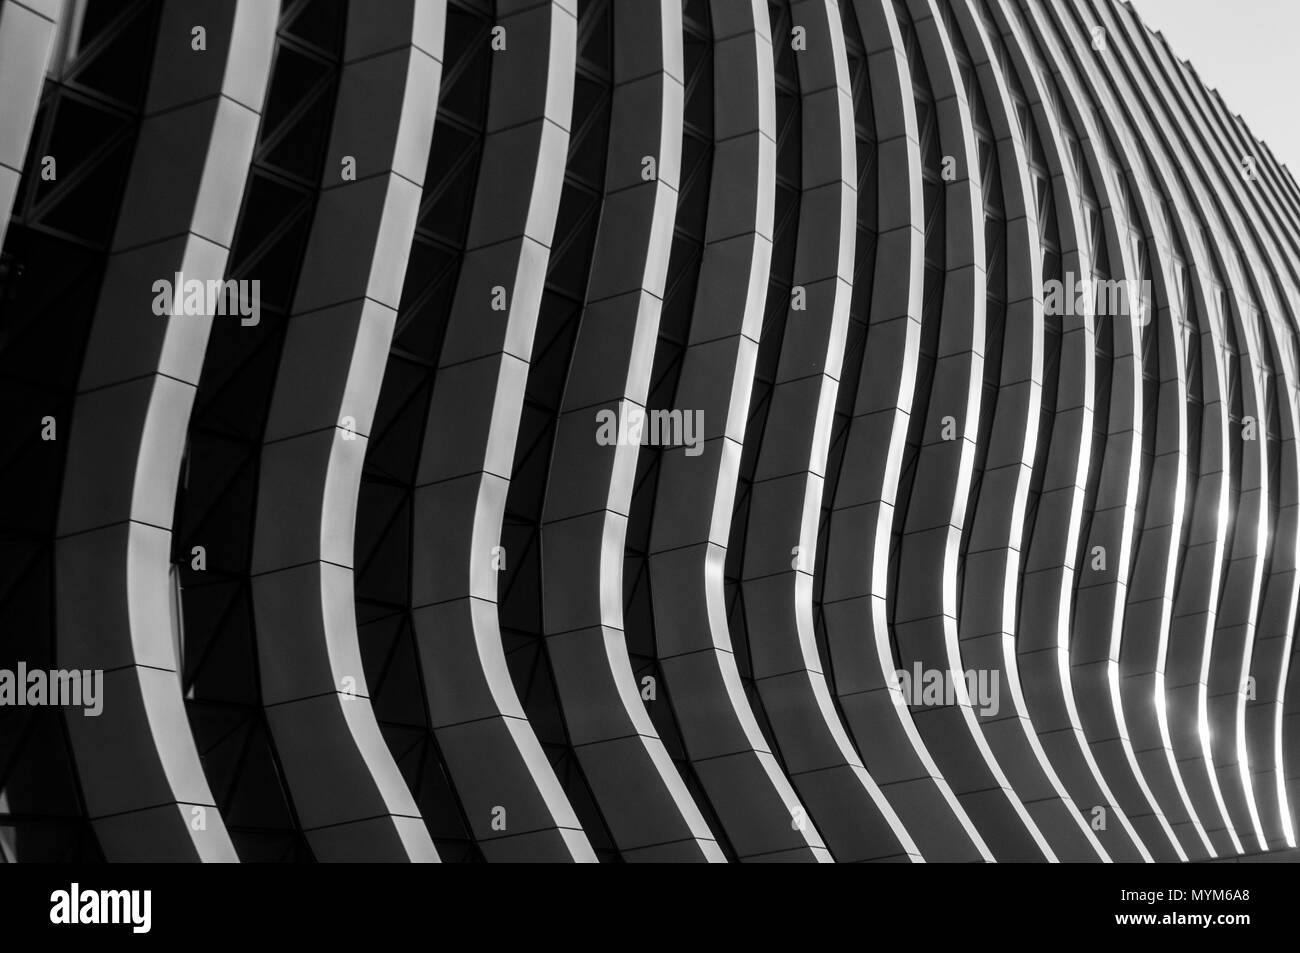 Contemporary geometric facade of a building with wavy lines in monochrome. Stock Photo